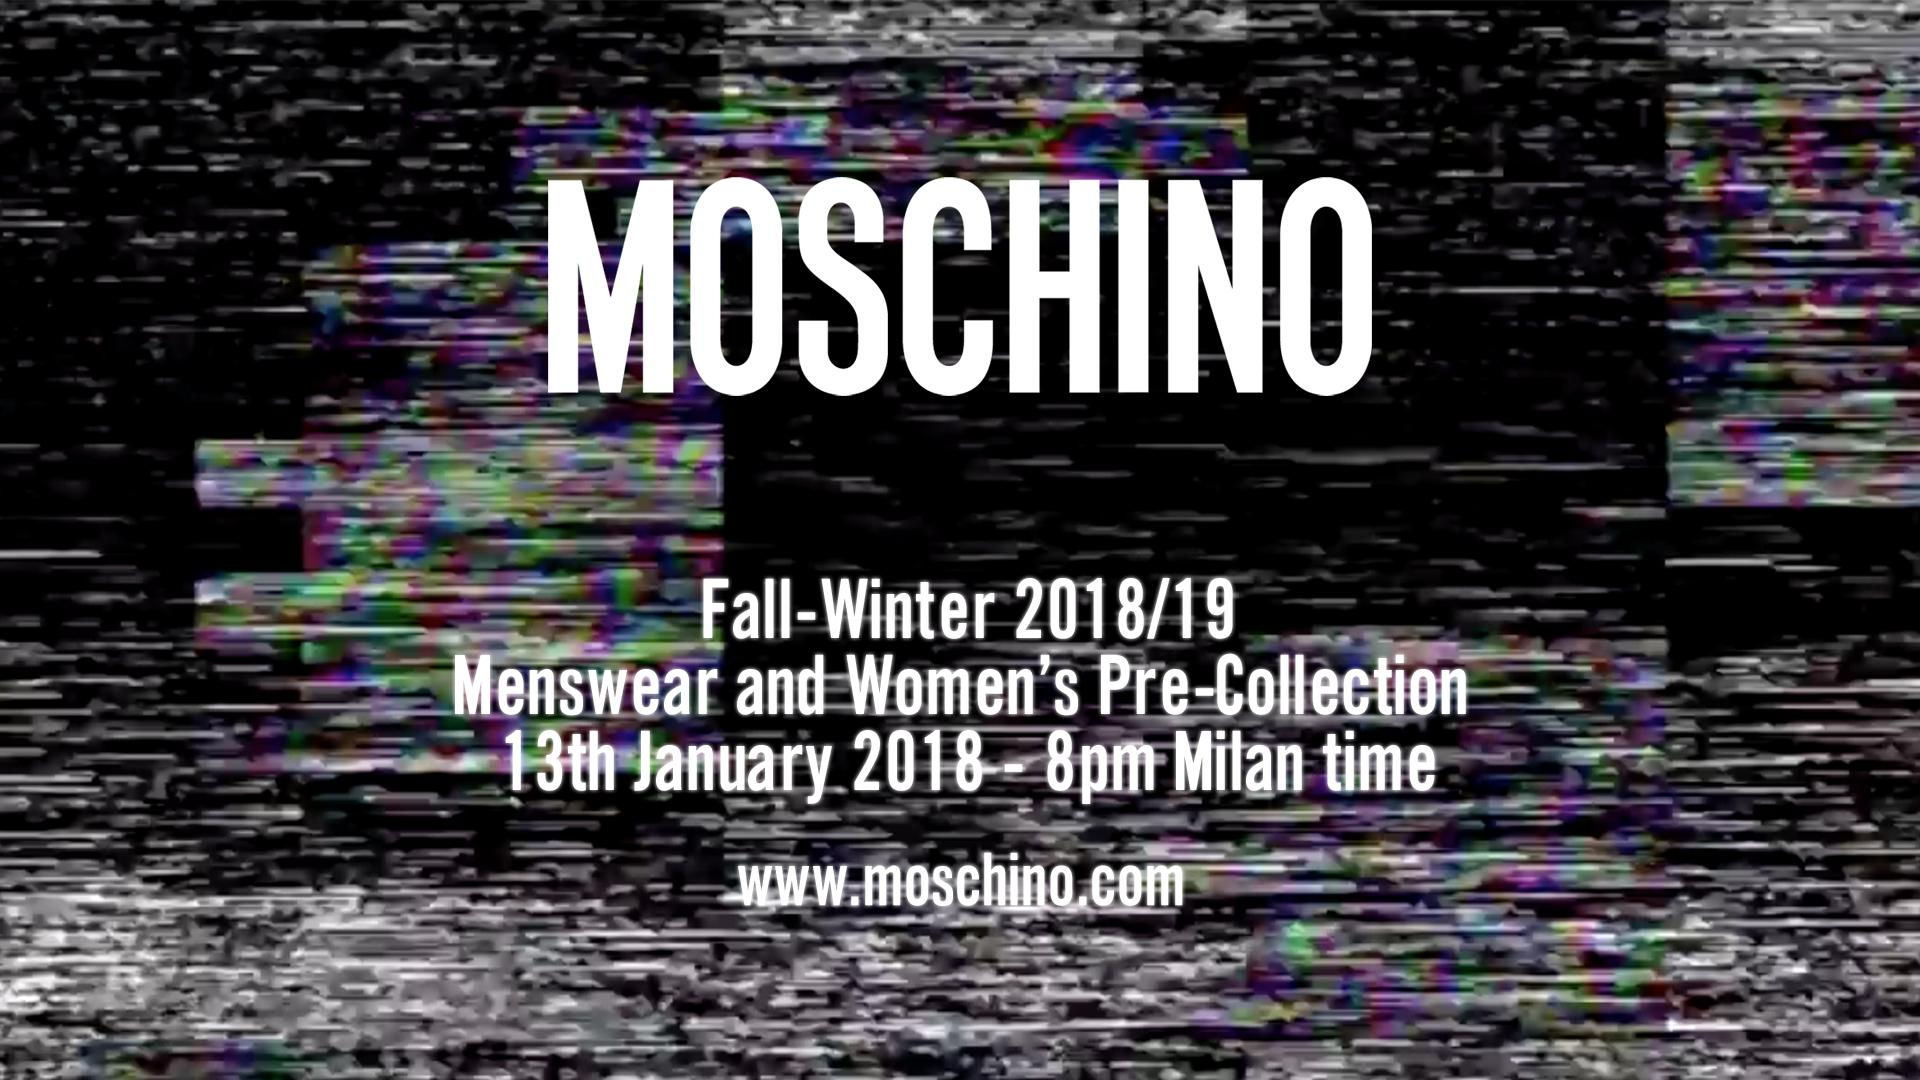 Moschino Fall Winter 2018 Menswear and Women's Pre Collection Fashion Show Live Streaming